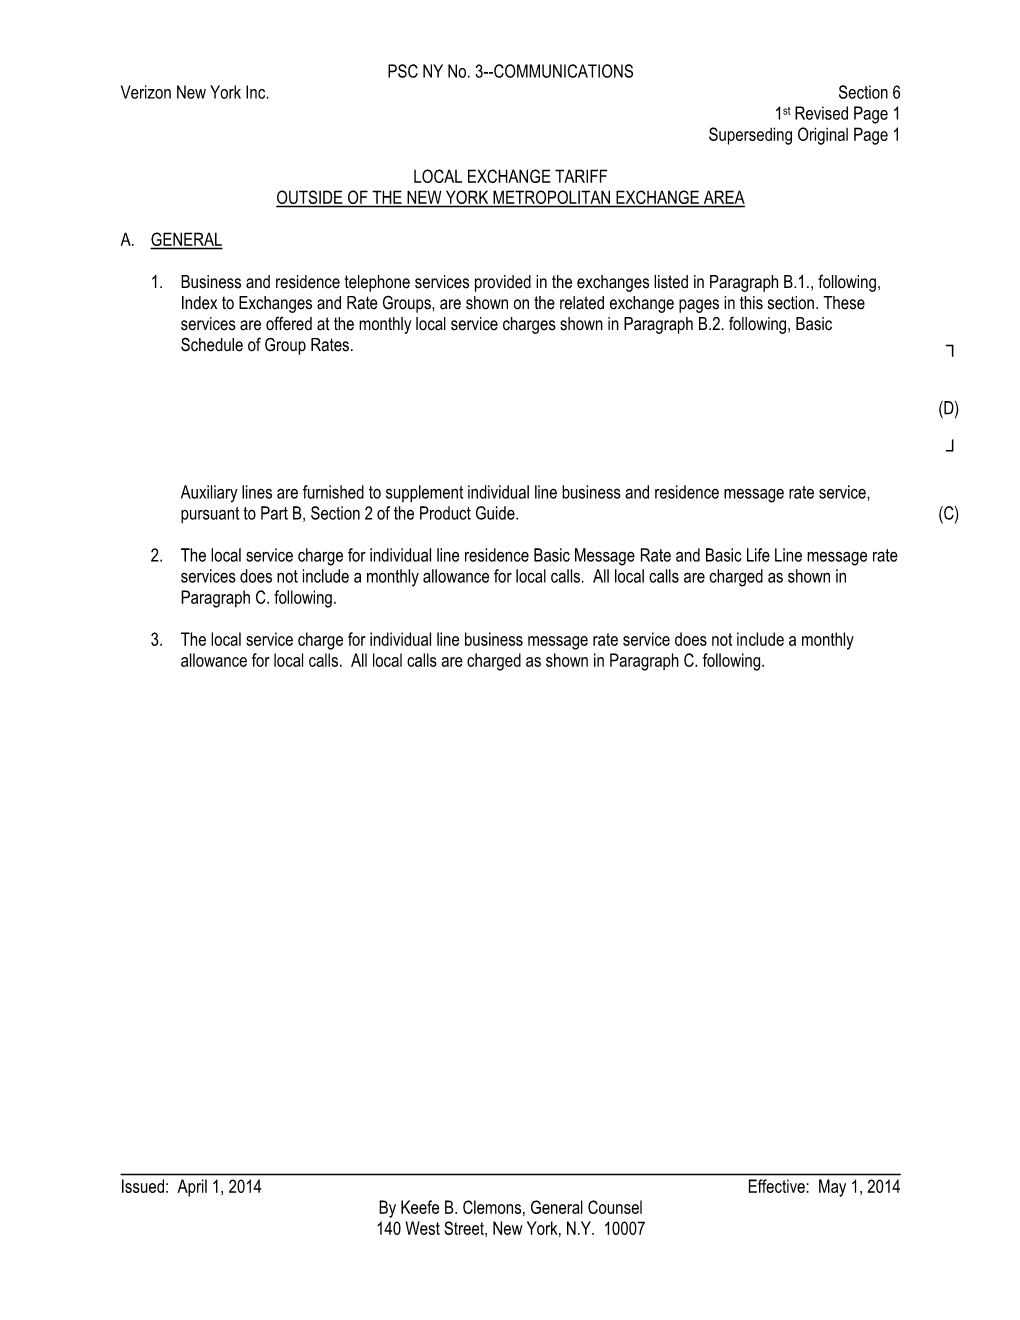 PSC NY No. 3--COMMUNICATIONS Verizon New York Inc. Section 6 1St Revised Page 1 Superseding Original Page 1